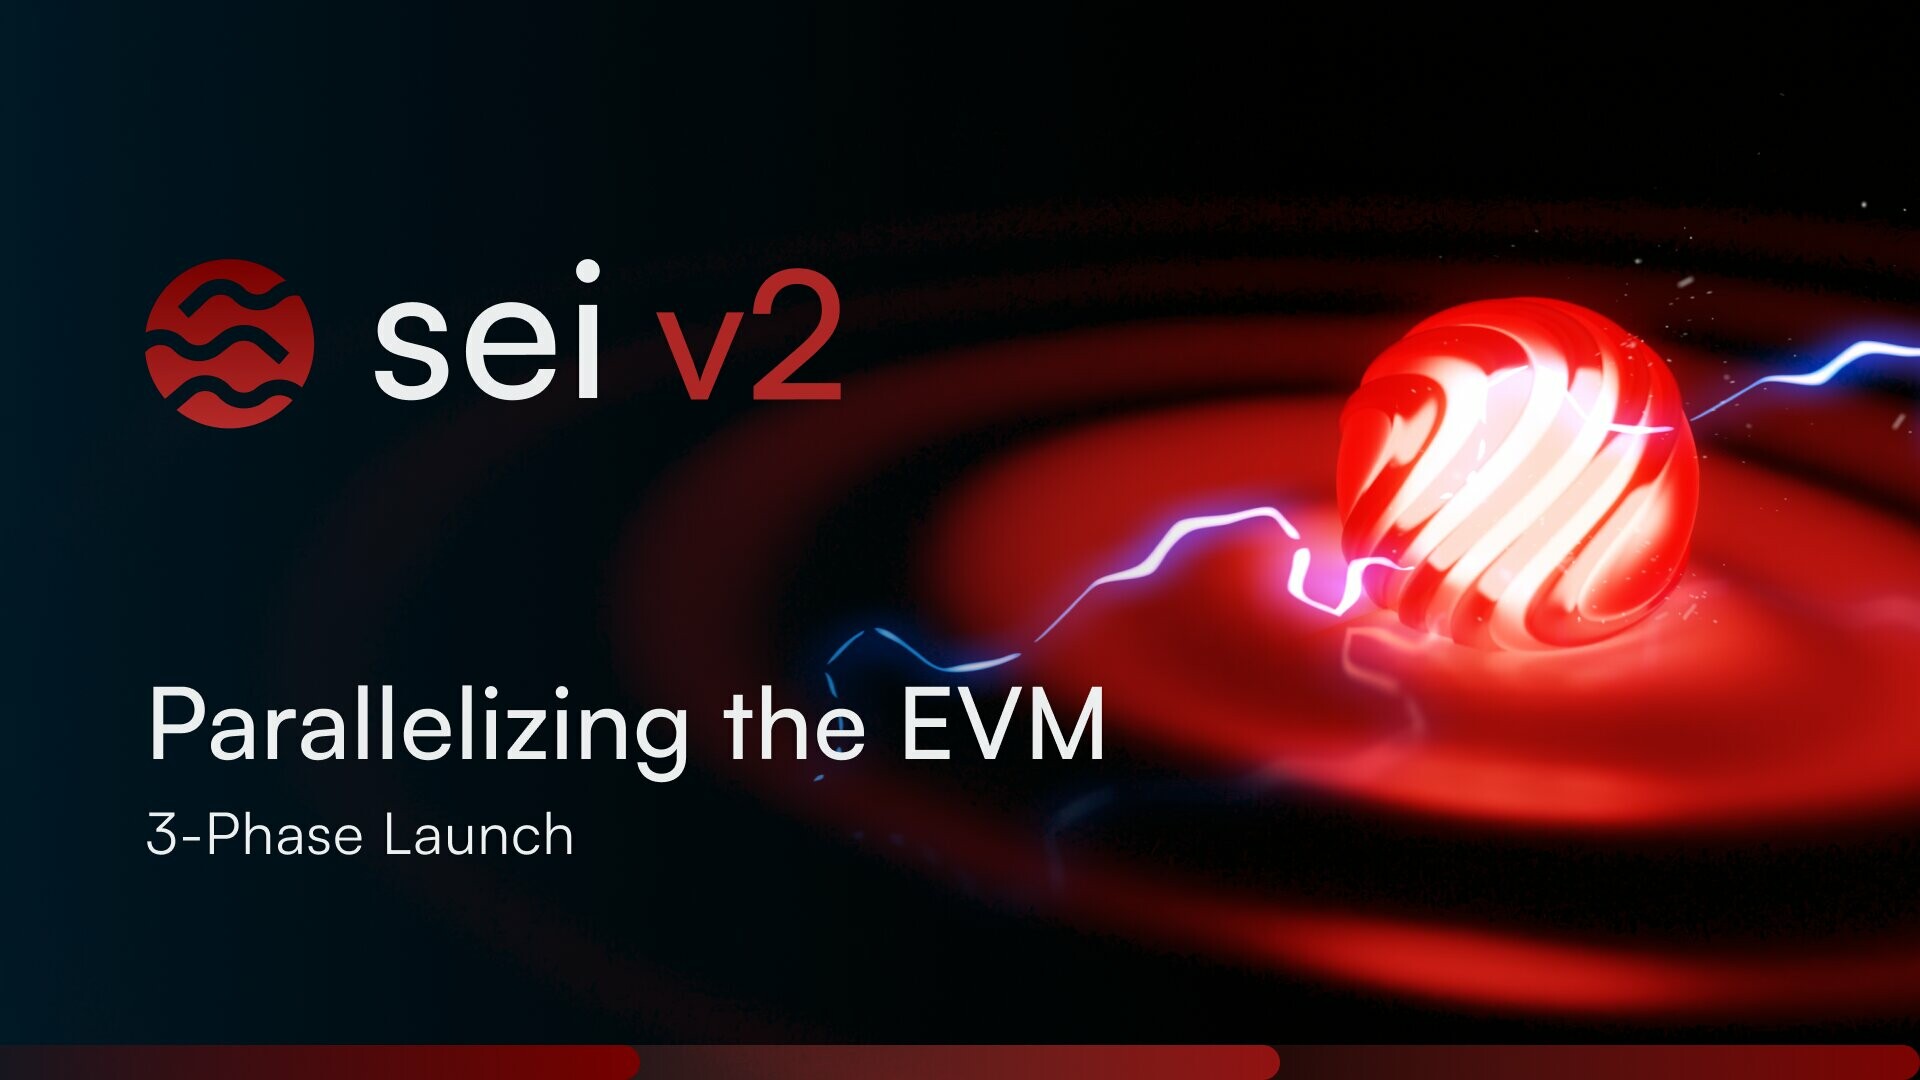 Sei V2: A Revolutionary Upgrade that Introduces the First Production-Ready Parallelized EVM